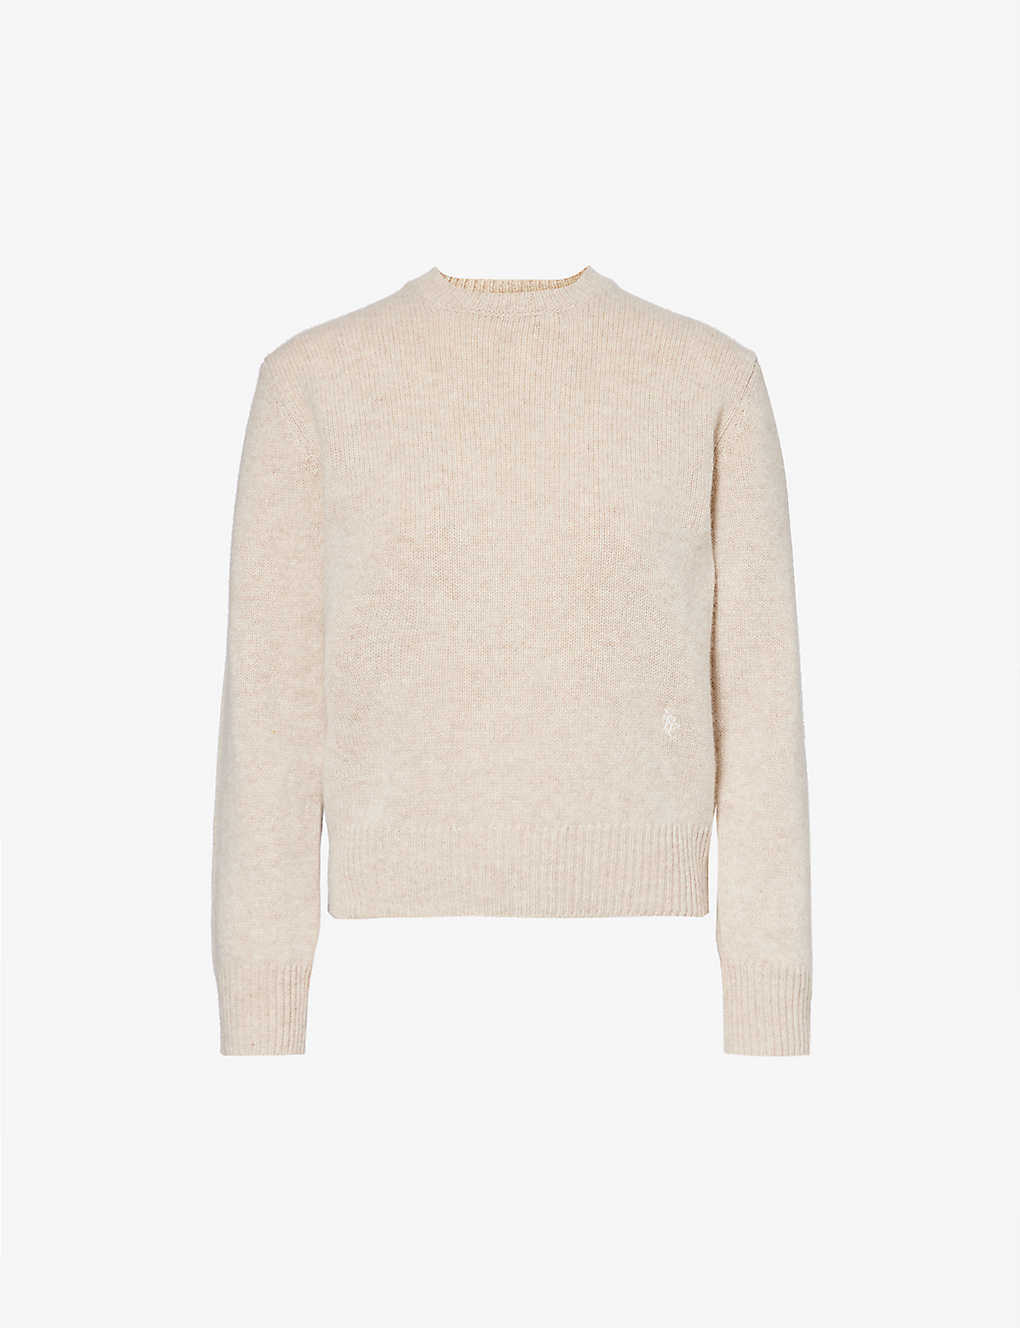 Sporty And Rich Brand-embroidered Wool Jumper In Heather Oatmeal